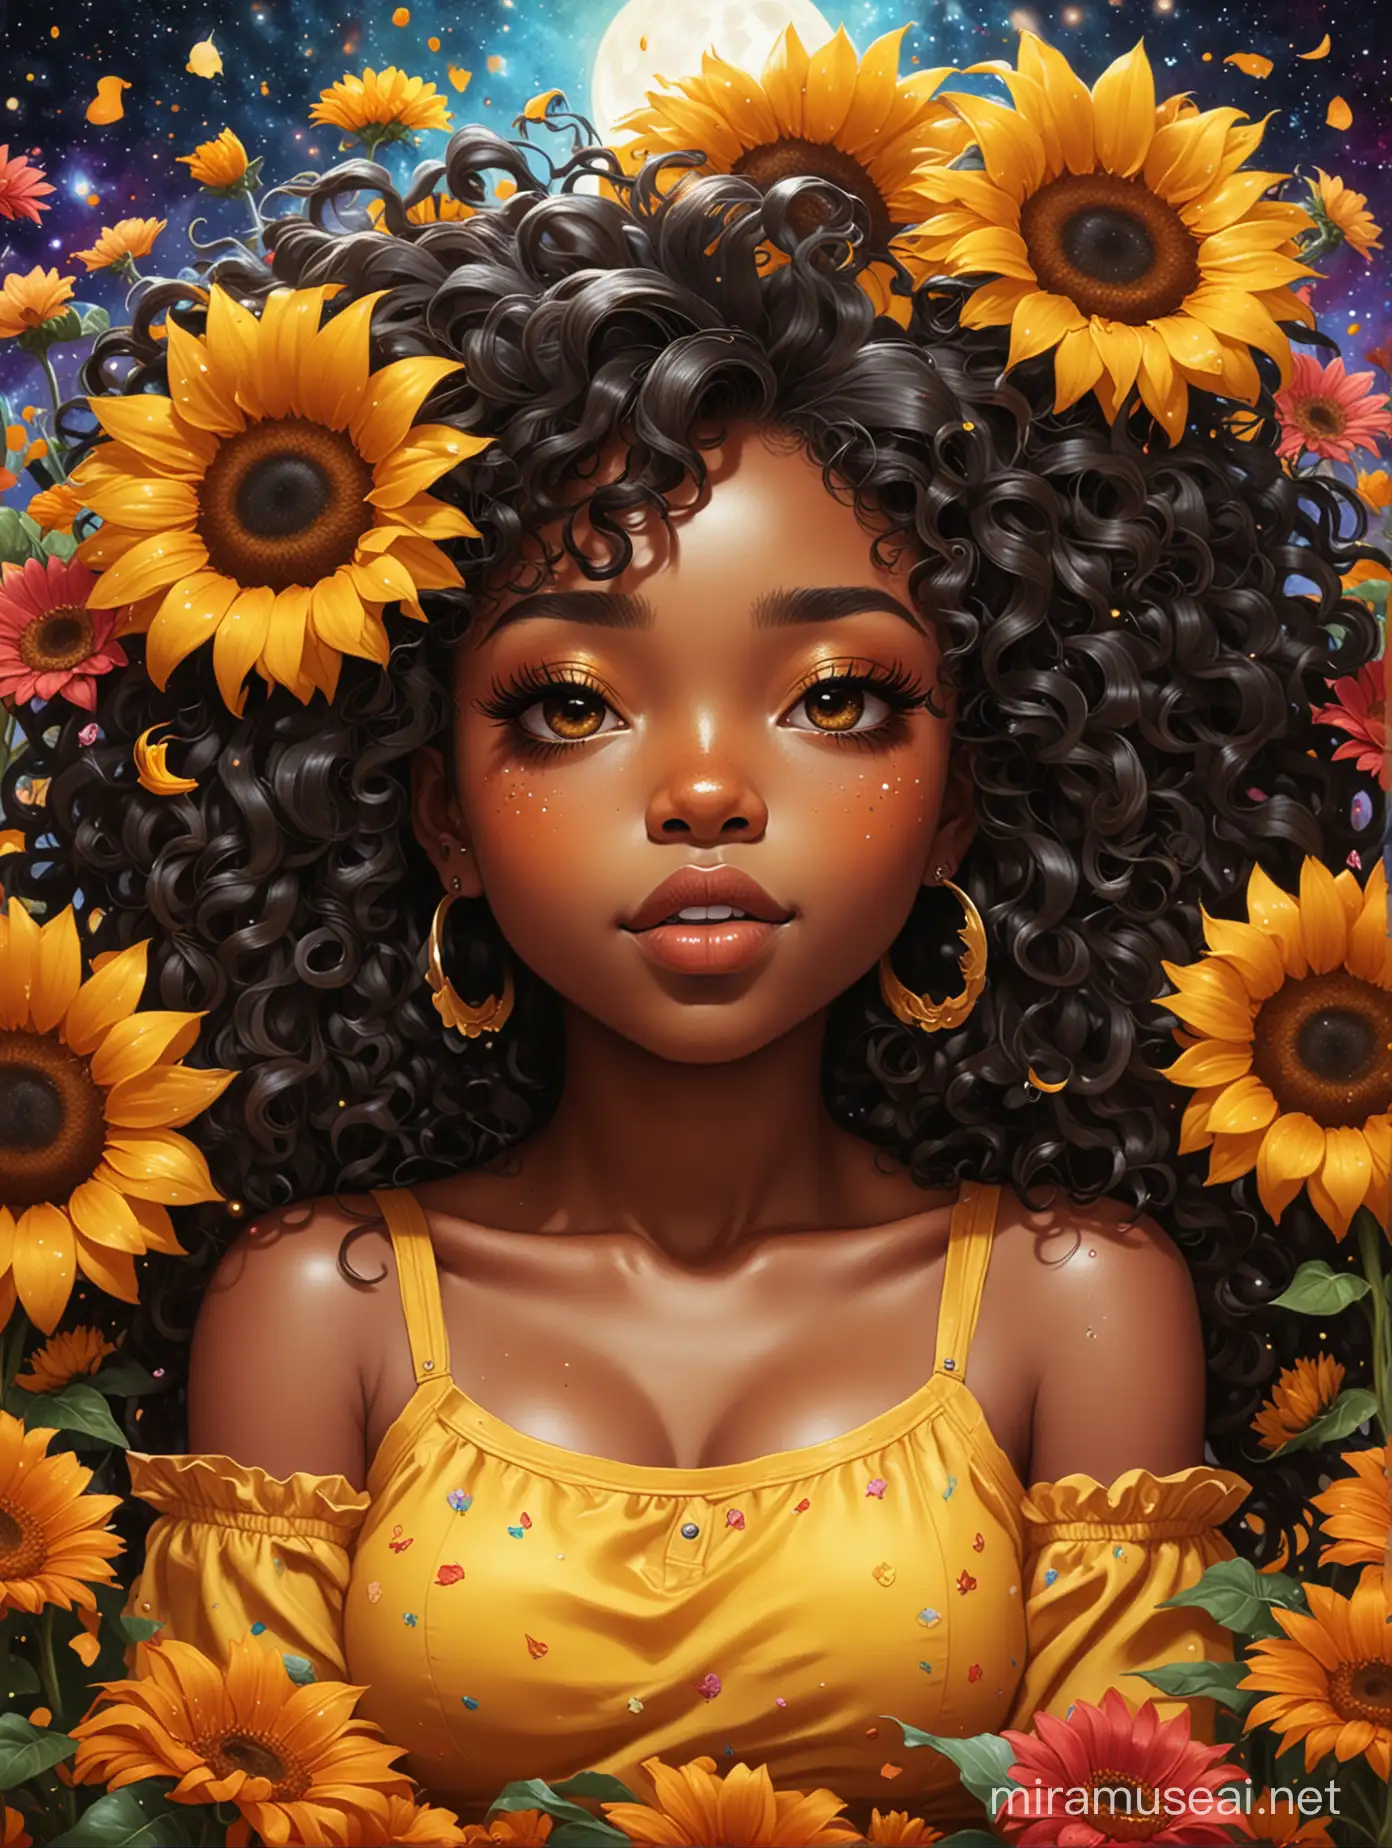 A sassy thick-lined expressive oil painting art cartoon black chibi girl lounging lazily on her side, surrounded by colorful flower petals. She is in the middle of the astrological Leo symbol with Prominent makeup. Highly detailed tightly curly black afro. Background of large yellow sunflowers surrounding her . Looking up coyly, she grins widely, showing sharp lion teeth. Her poofy hair forms a mane framing her confident, regal expression.